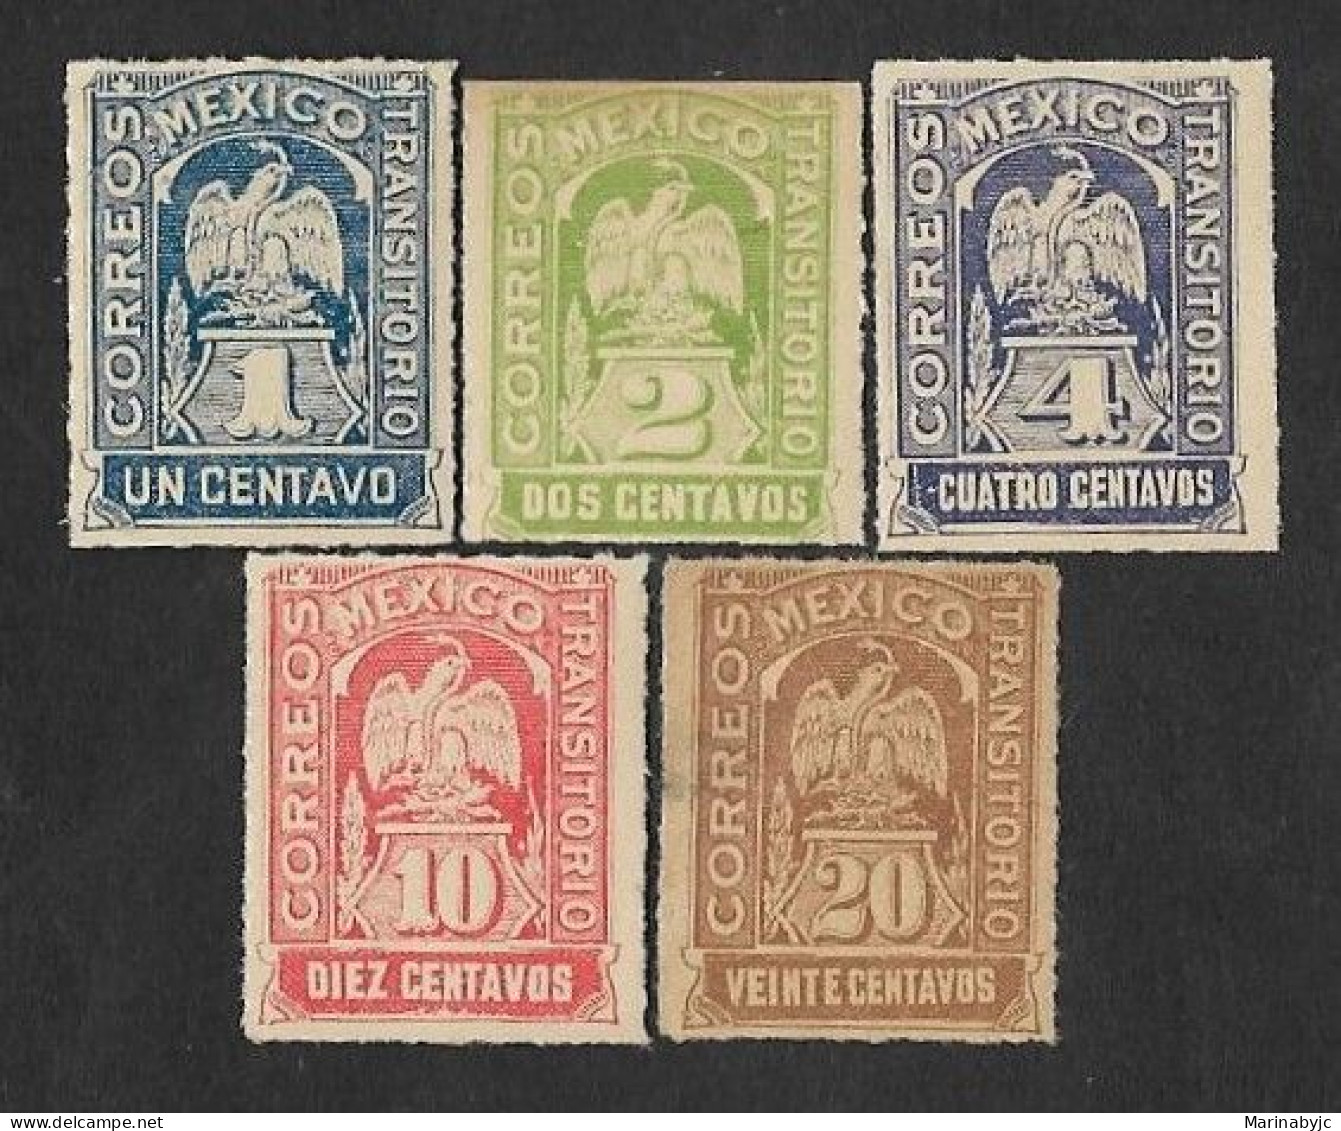 SE)1914 MEXICO, TRANSIENTS, COAT OF ARMS 1C SCT354, 2C SCT355, 4C SCT356, 10C SCT358 & 20C SCT359, MINT - Mexico